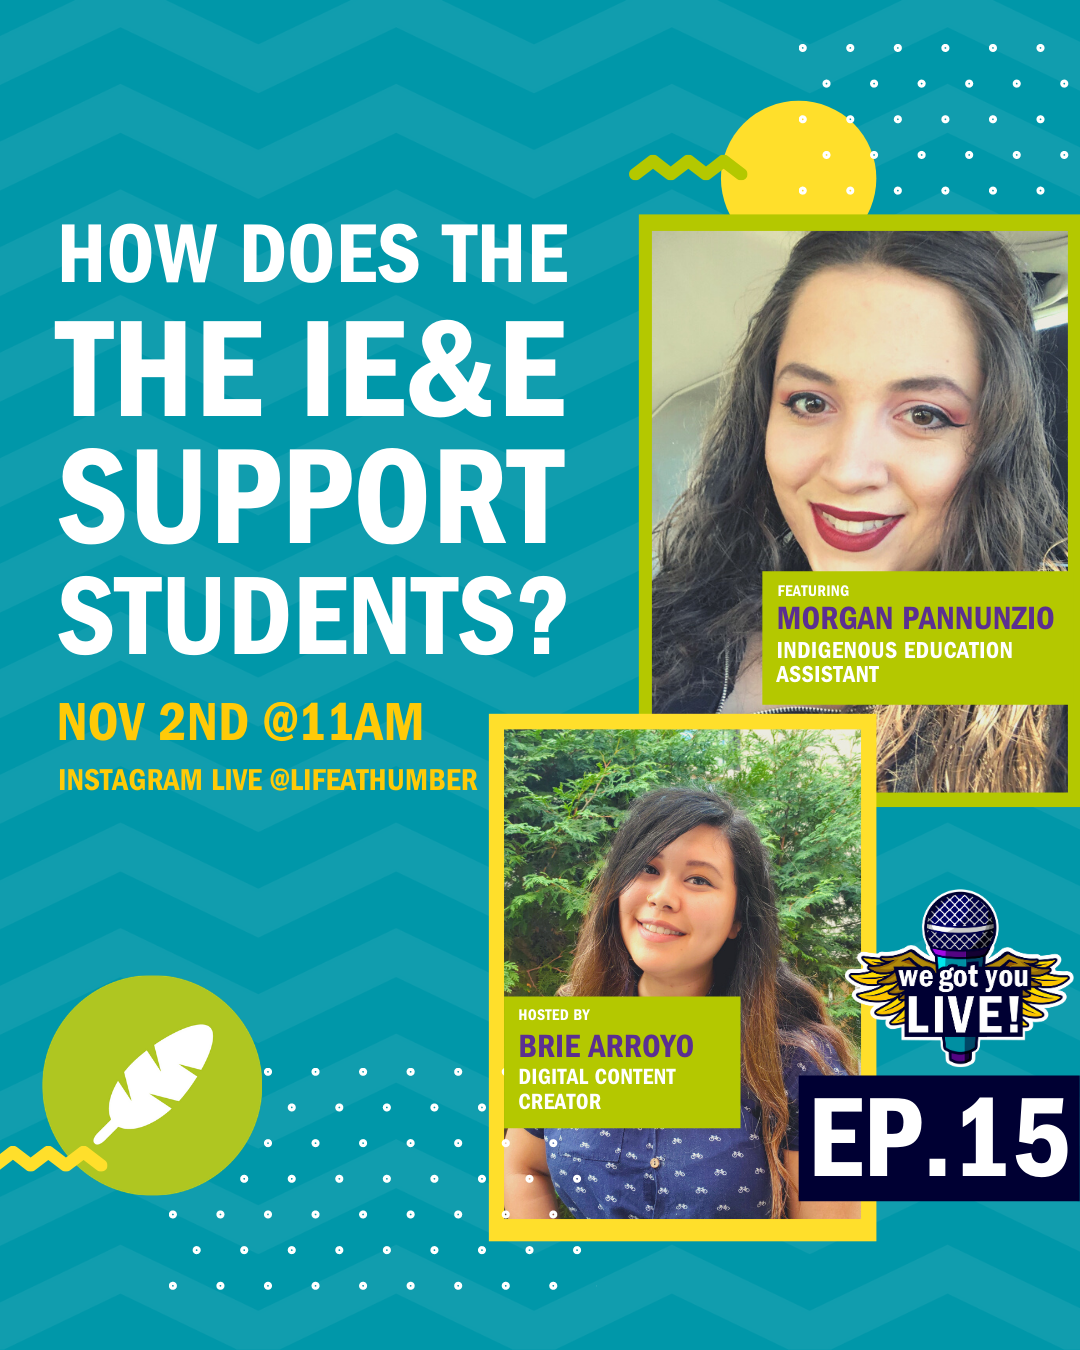 How does the IE&E support students, Join us in our conversation with Morgan Pannunzio on Nov 2 to learn more about IE&E, hosted by Brie Arroyo